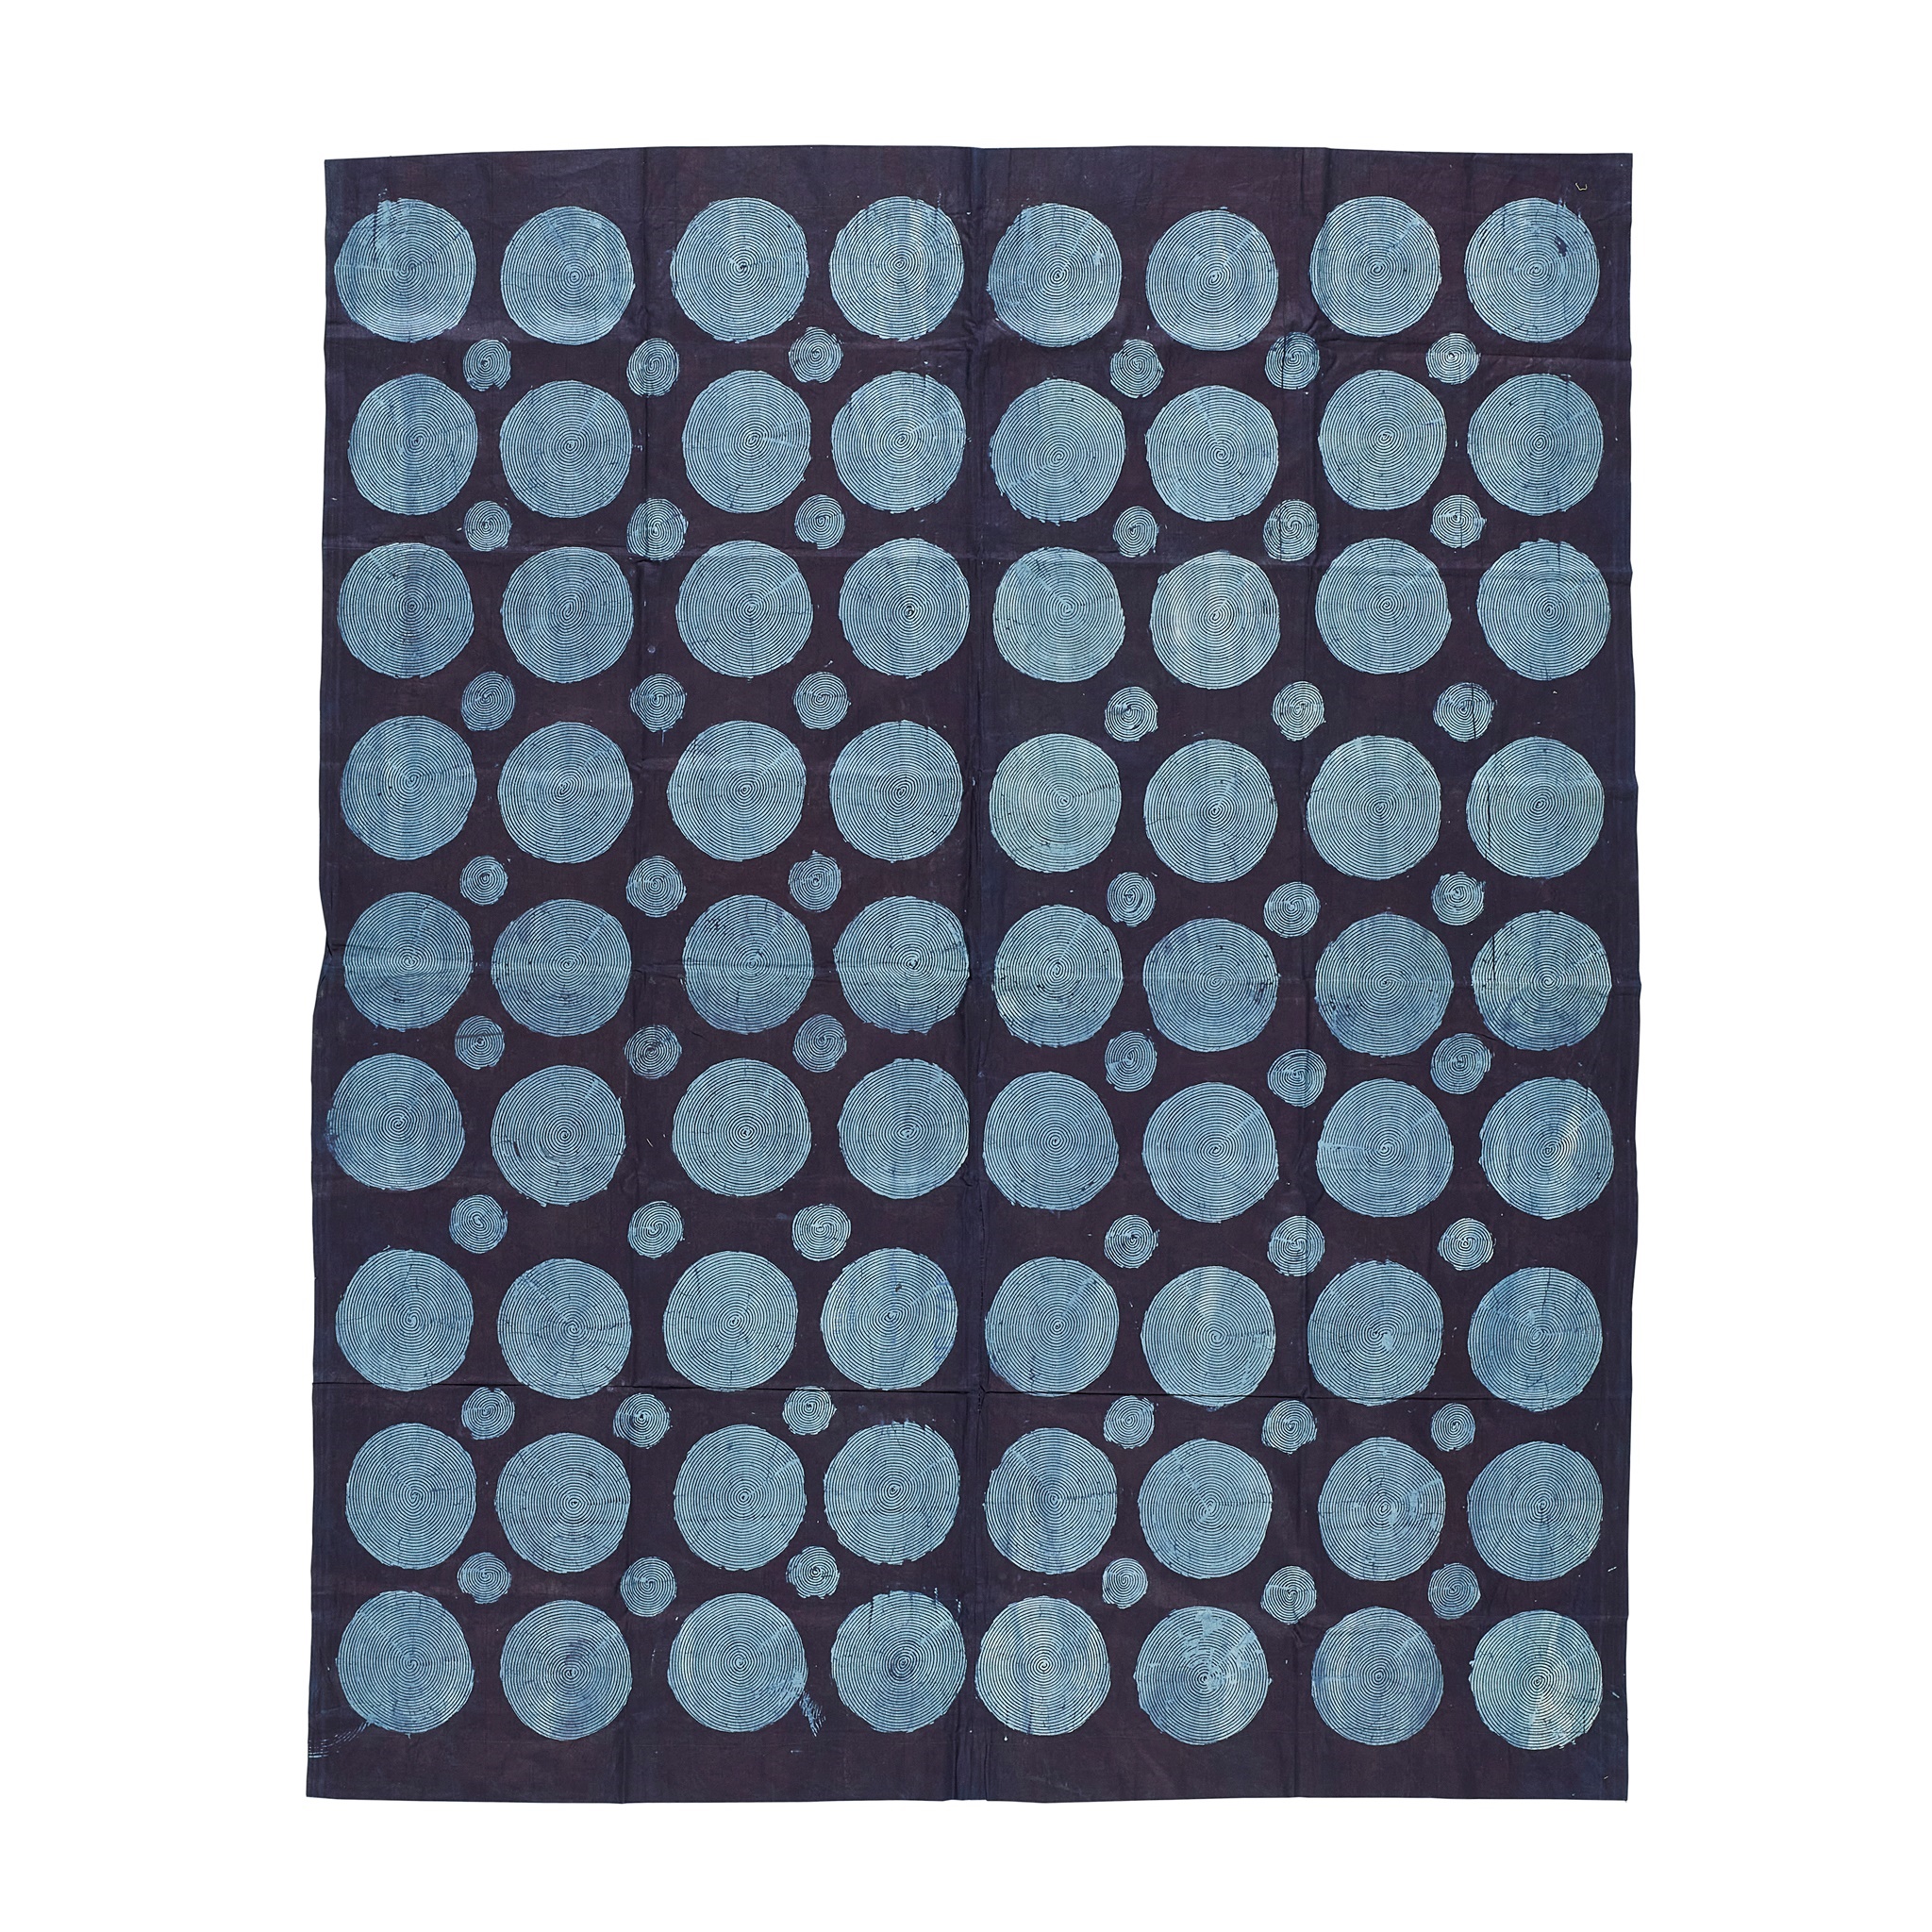 LOT 192 | YORUBA ADIRE TEXTILE | NIGERIA dyed cotton, with rows of light blue circles on a navy ground 204cm x 173cm | Sold for £2,750 + fees Provenance: The Keir McGuinness Collection of African Textiles